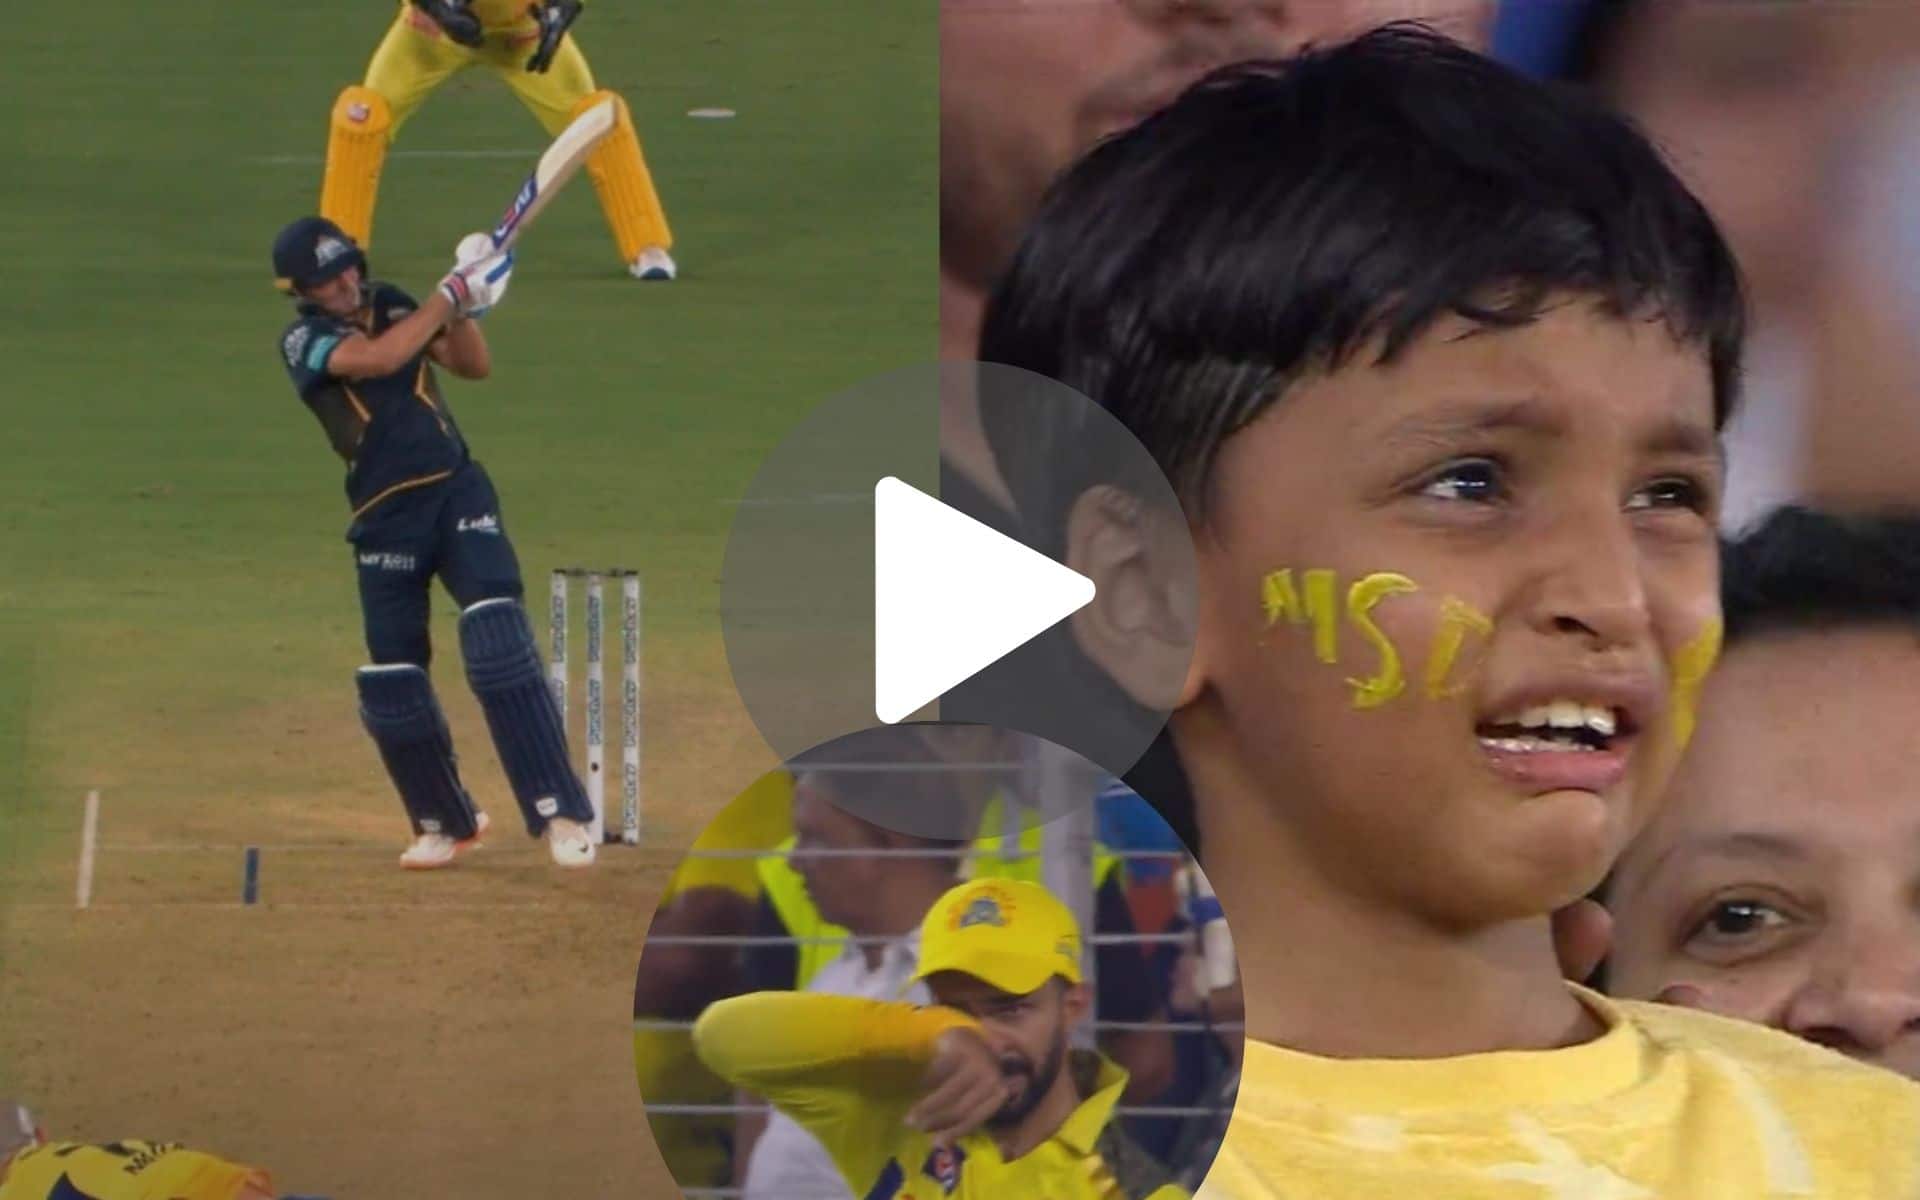 [Watch] CSK Tiny Fan 'Cries Hard' As Shubman Smashes Mitchell For Three Sixes In An Over